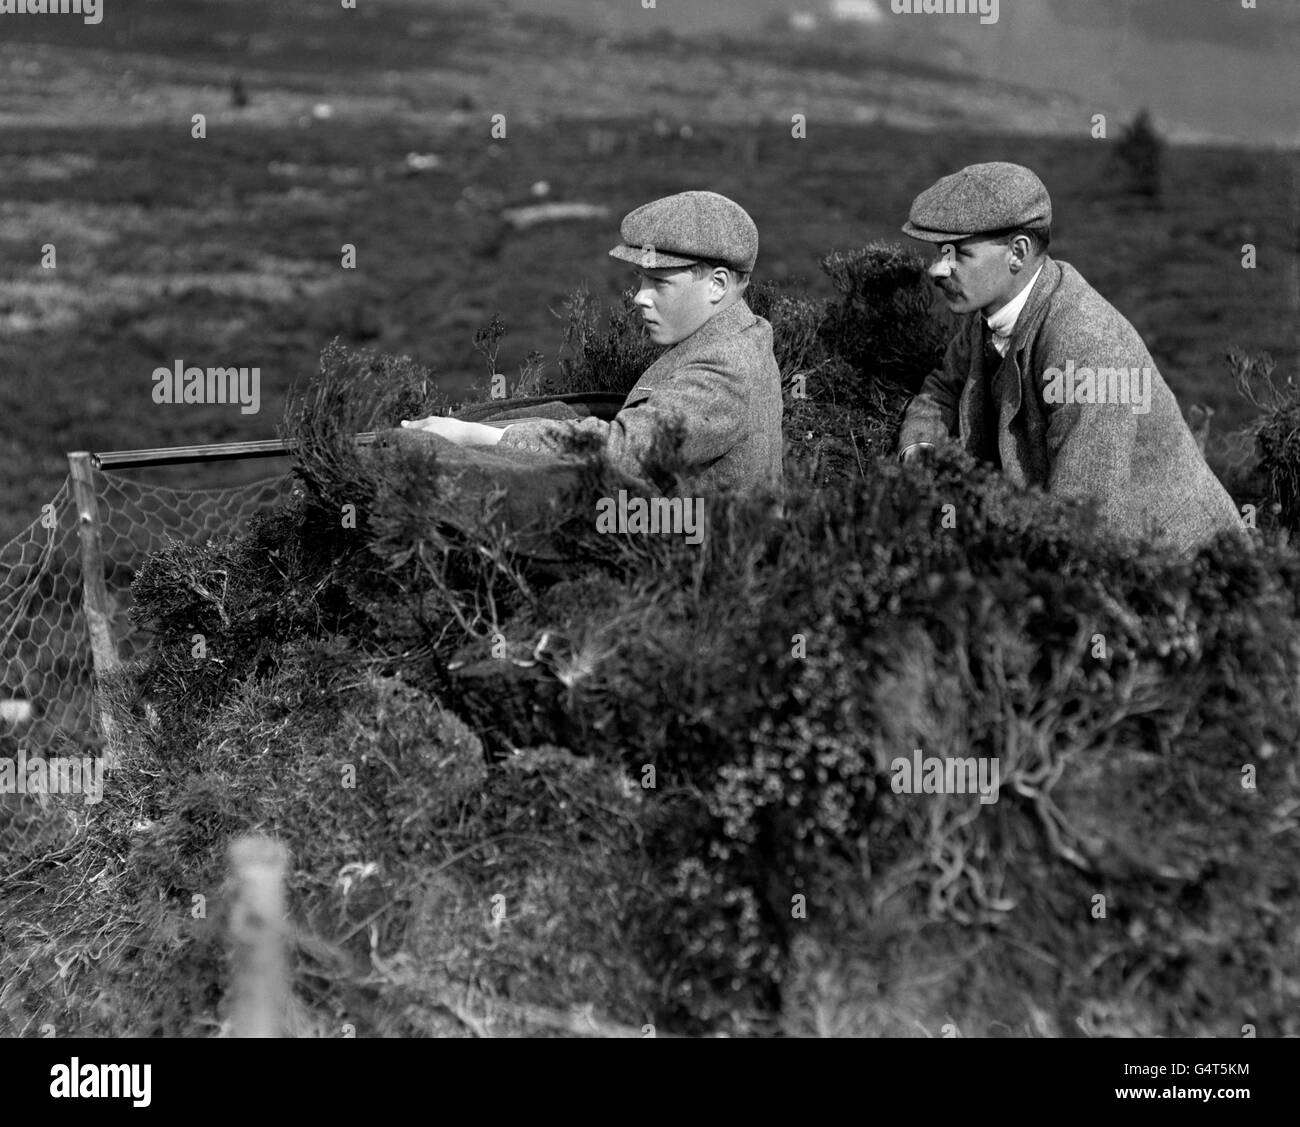 Edward, The Prince of Wales (later the Duke of Windsor) attends a shoot on the Balmoral Estate. Stock Photo